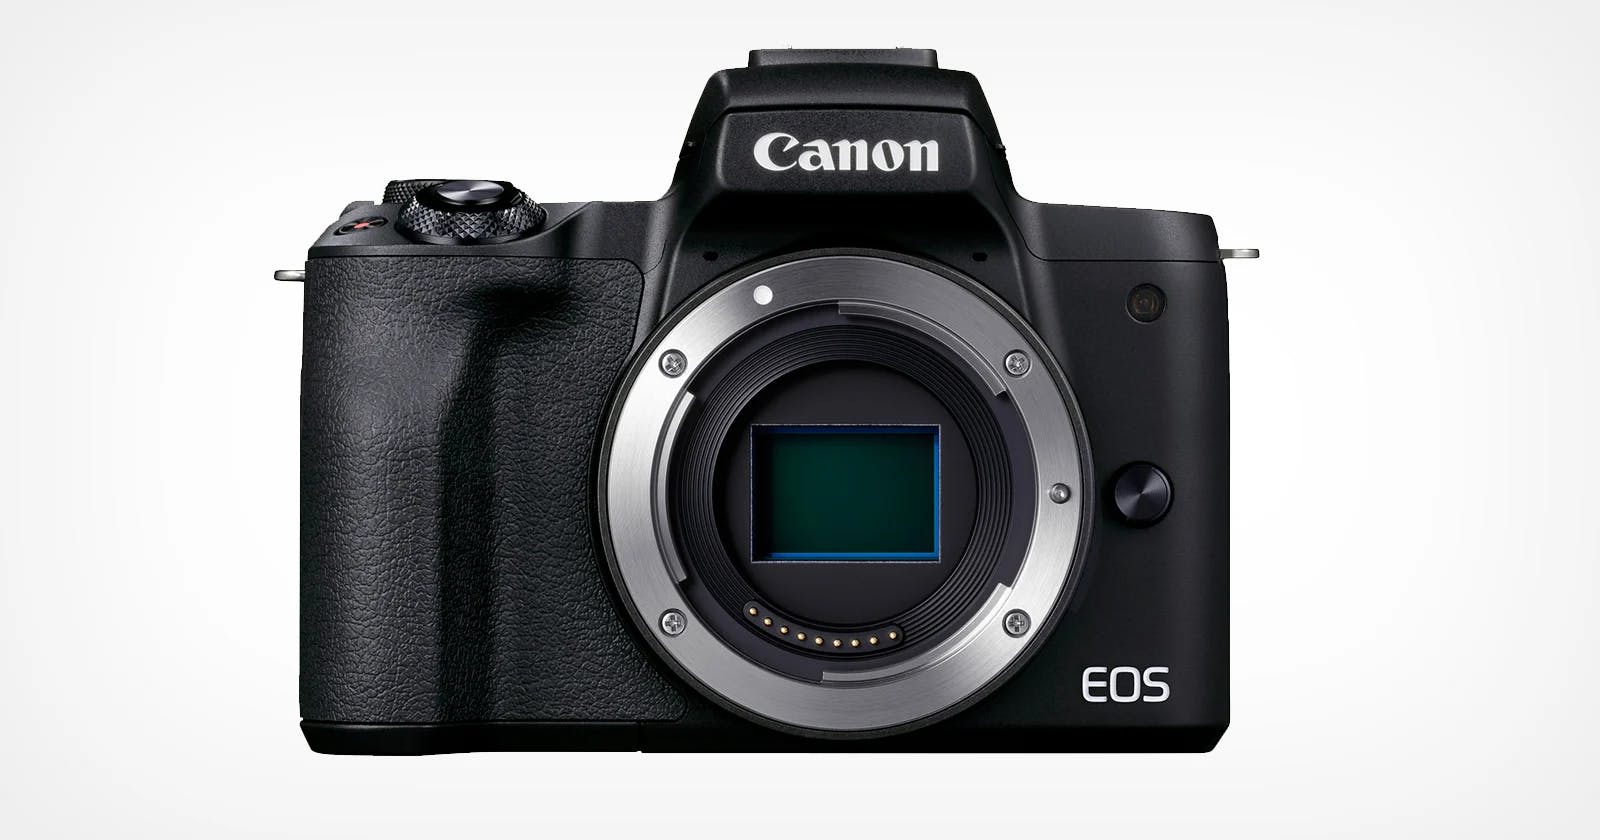 Cover Image for Exploring the Canon EOS M50: A Compact and Versatile Mirrorless Camera